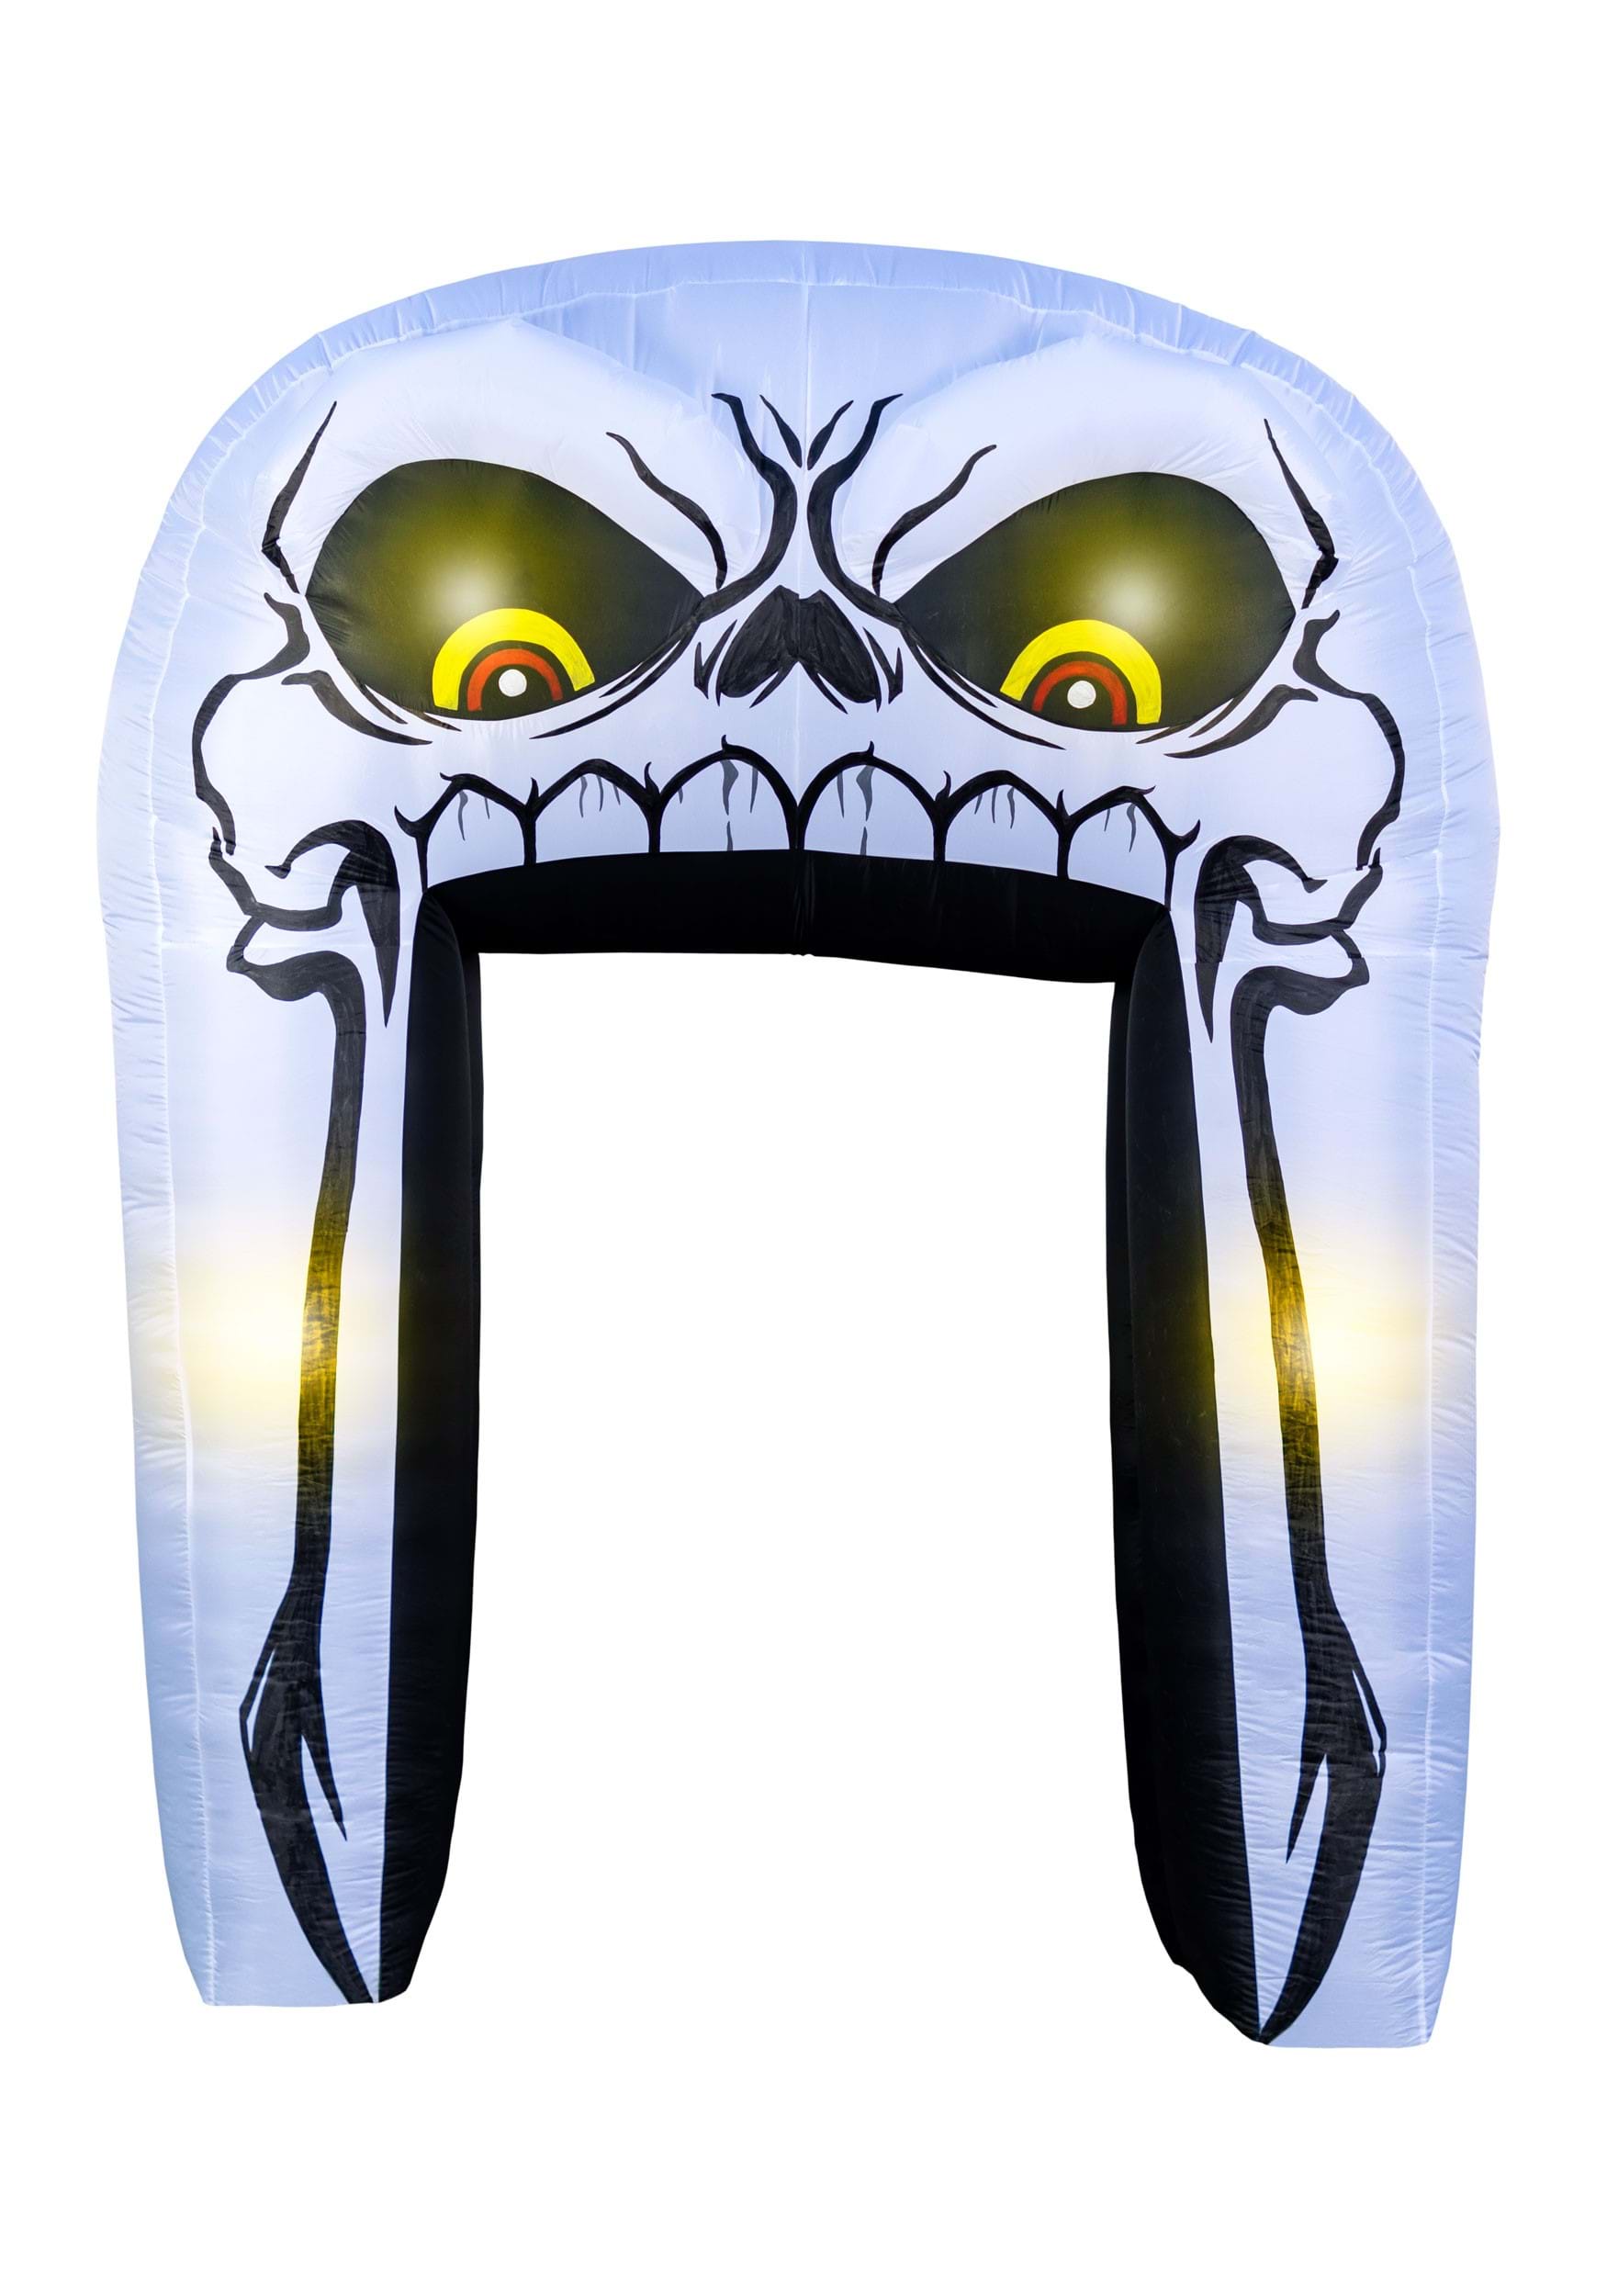 Image of Inflatable Skull Archway Decoration ID FUN3534AD-ST